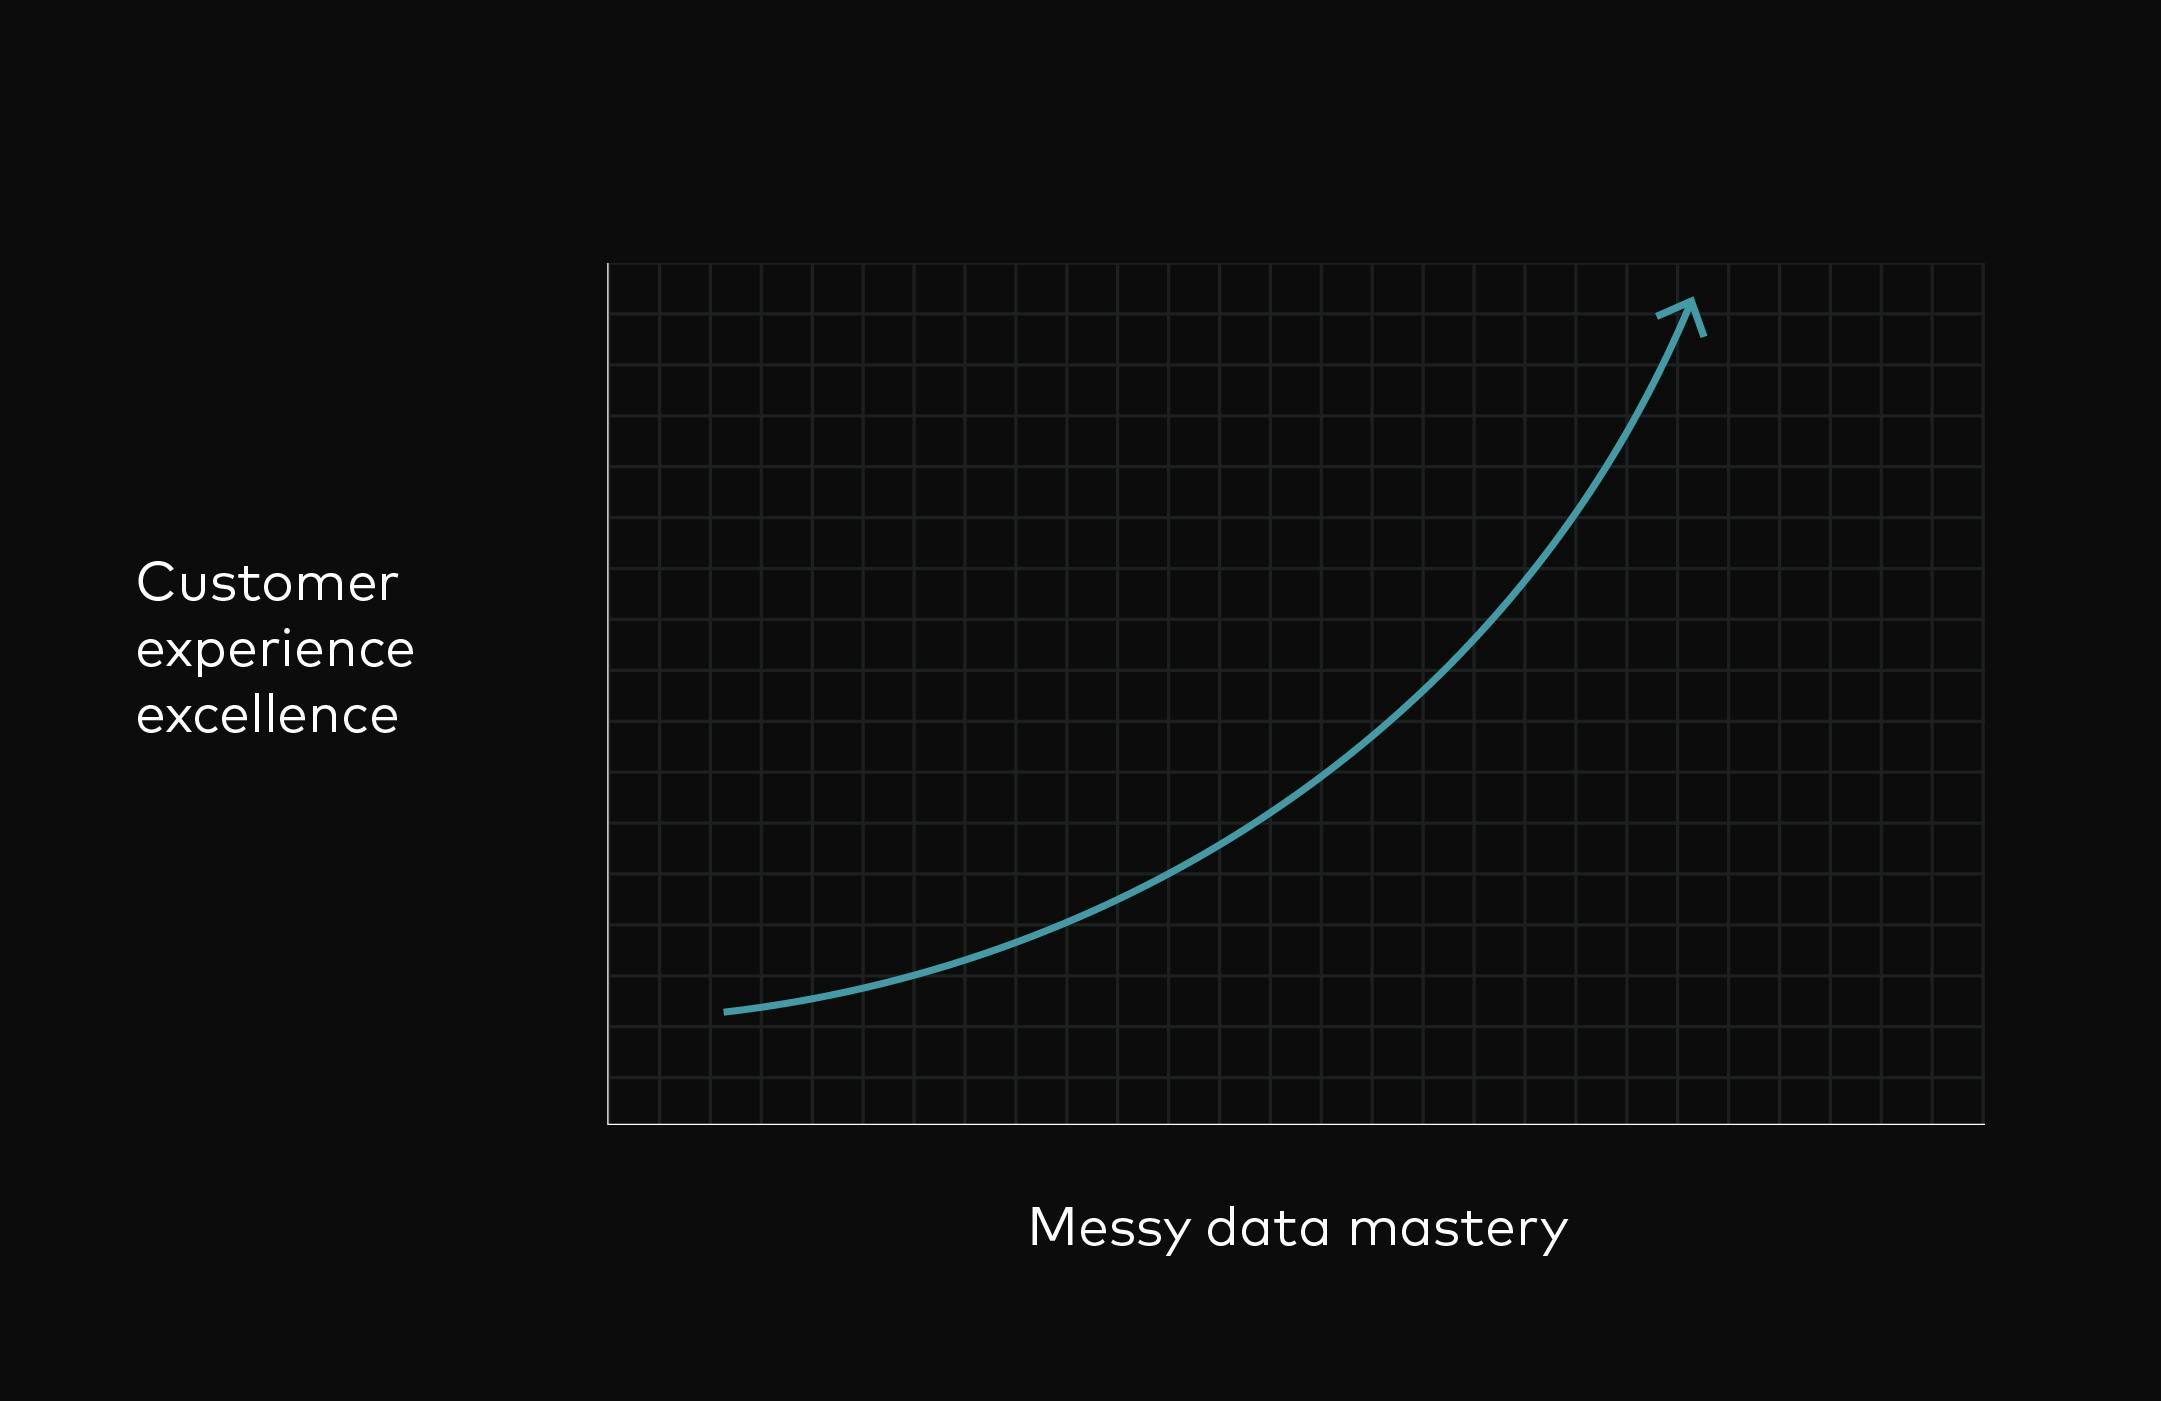 An exponential line chart showing that customer experience excellence growing exponentially as mastery of messy data grows